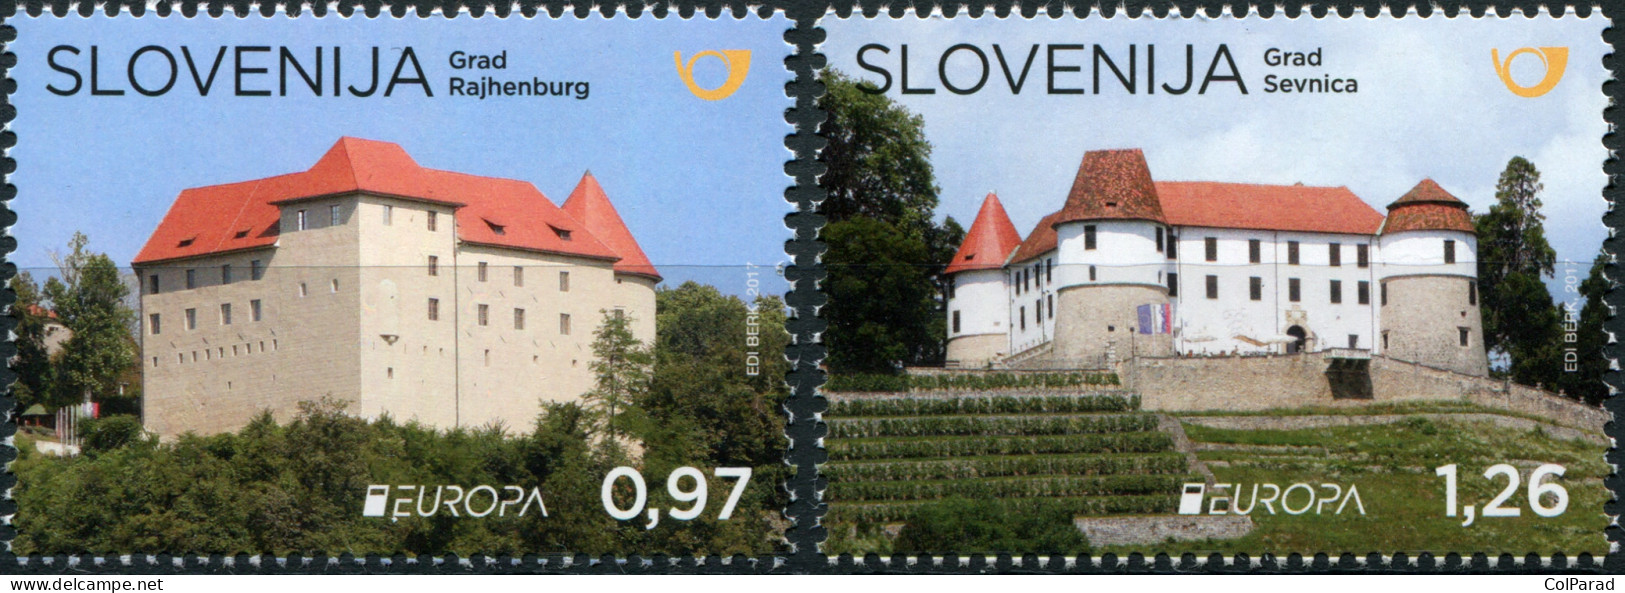 SLOVENIA - 2017 - SET OF 2 STAMPS MNH ** - EUROPA Stamps - Palaces And Castles - Slovenia